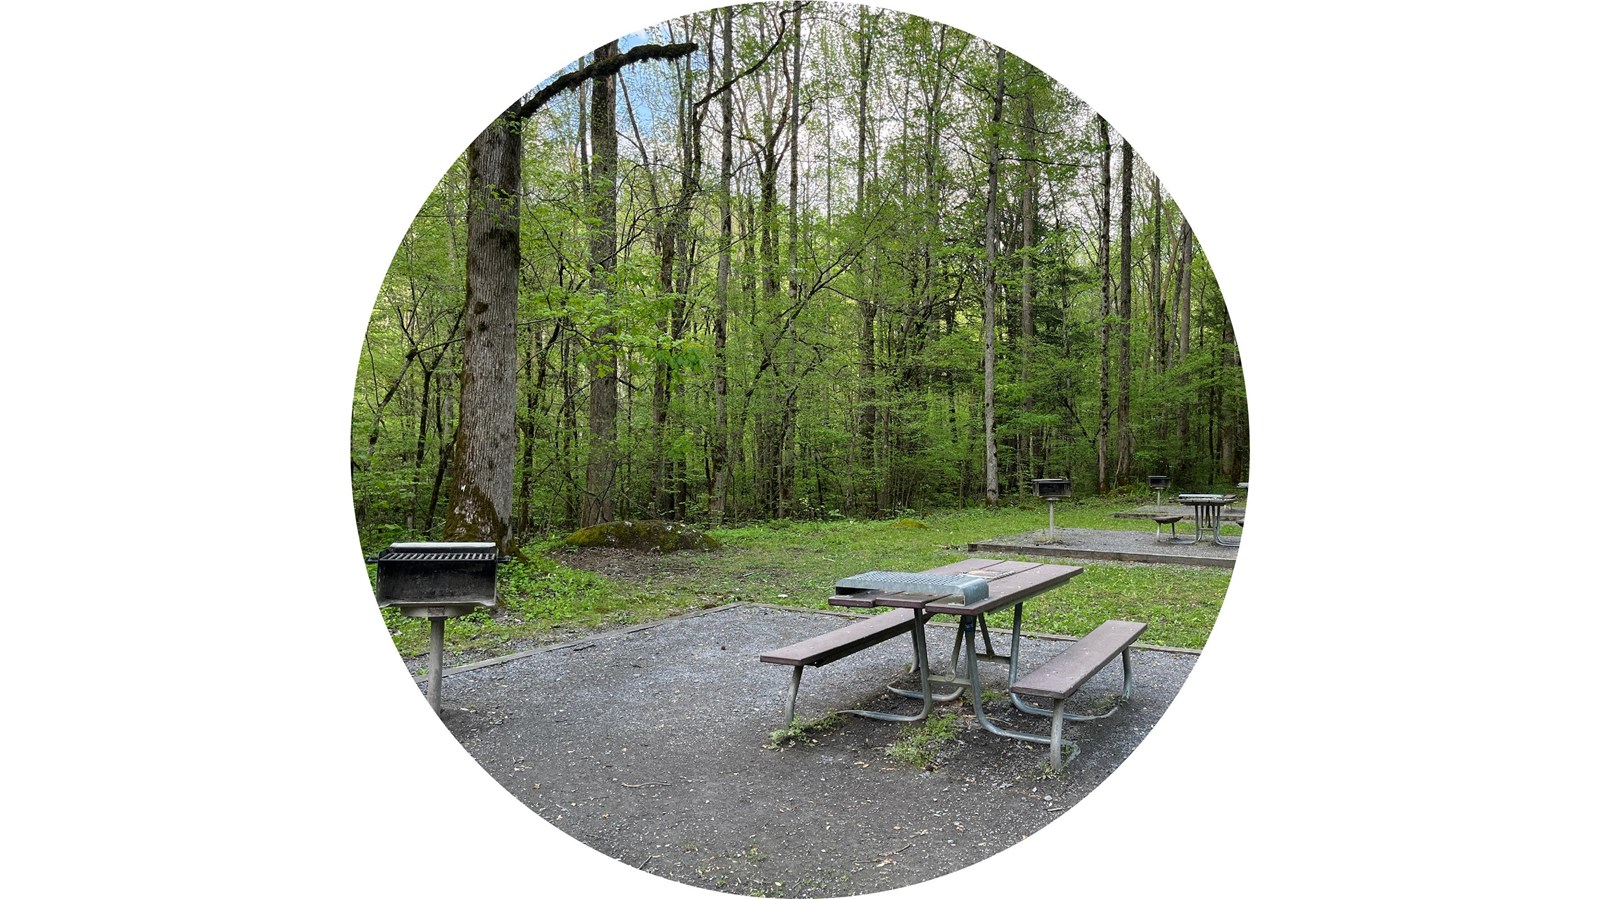 Wooden picnic tables on gravel pads near charcoal grills. Green trees in the background.